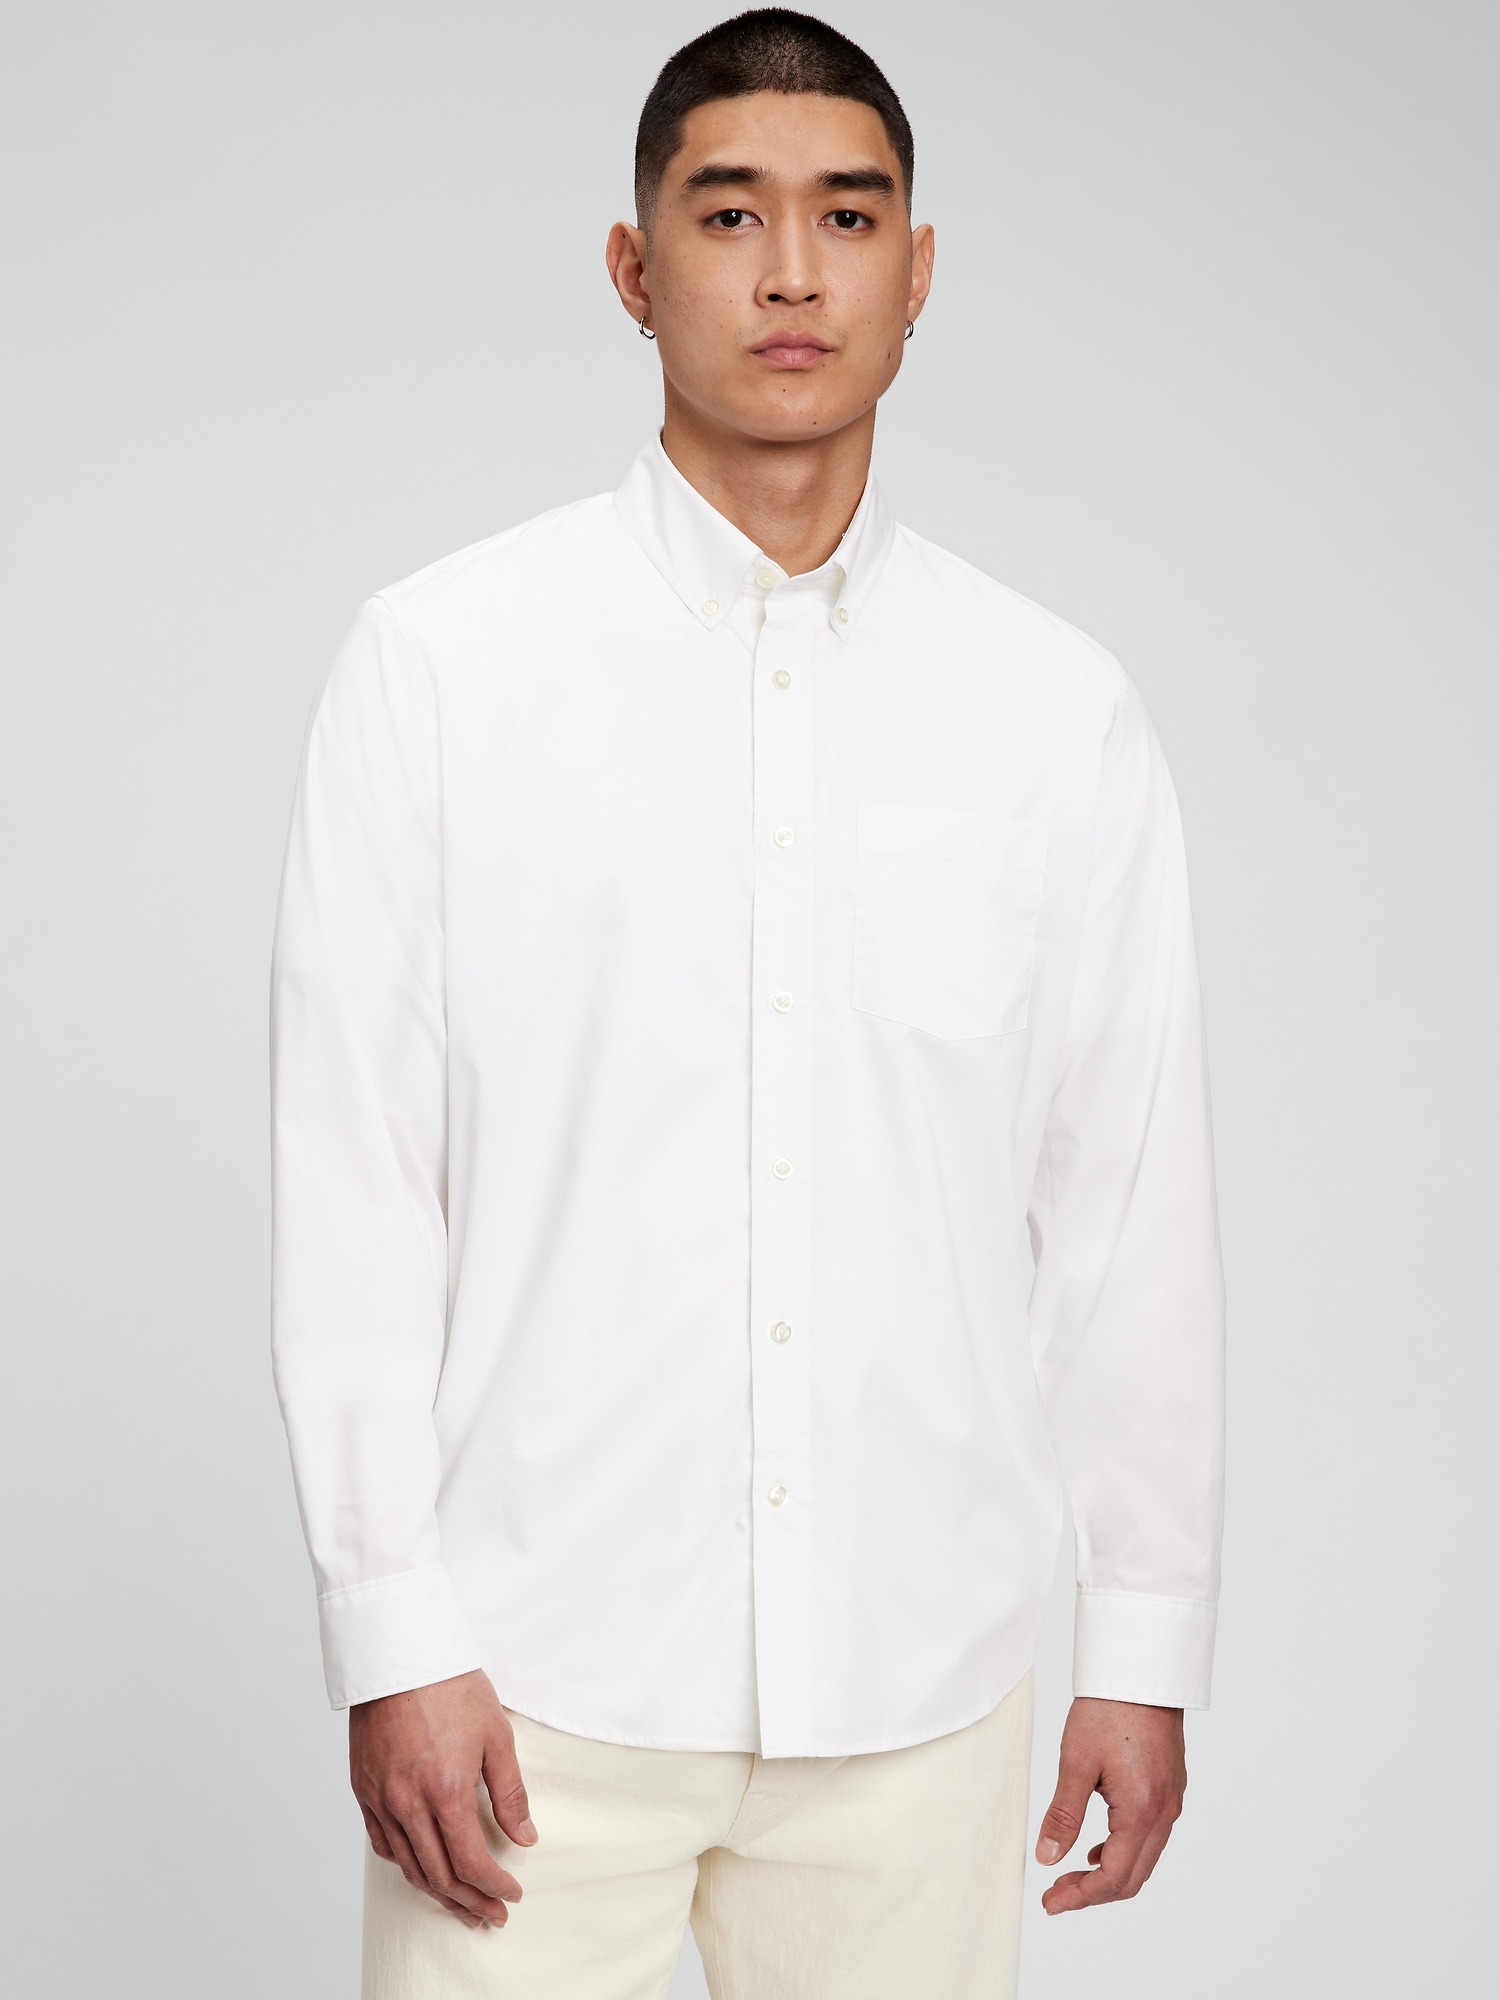 Gap All-Day Poplin Shirt in Untucked Fit white. 1